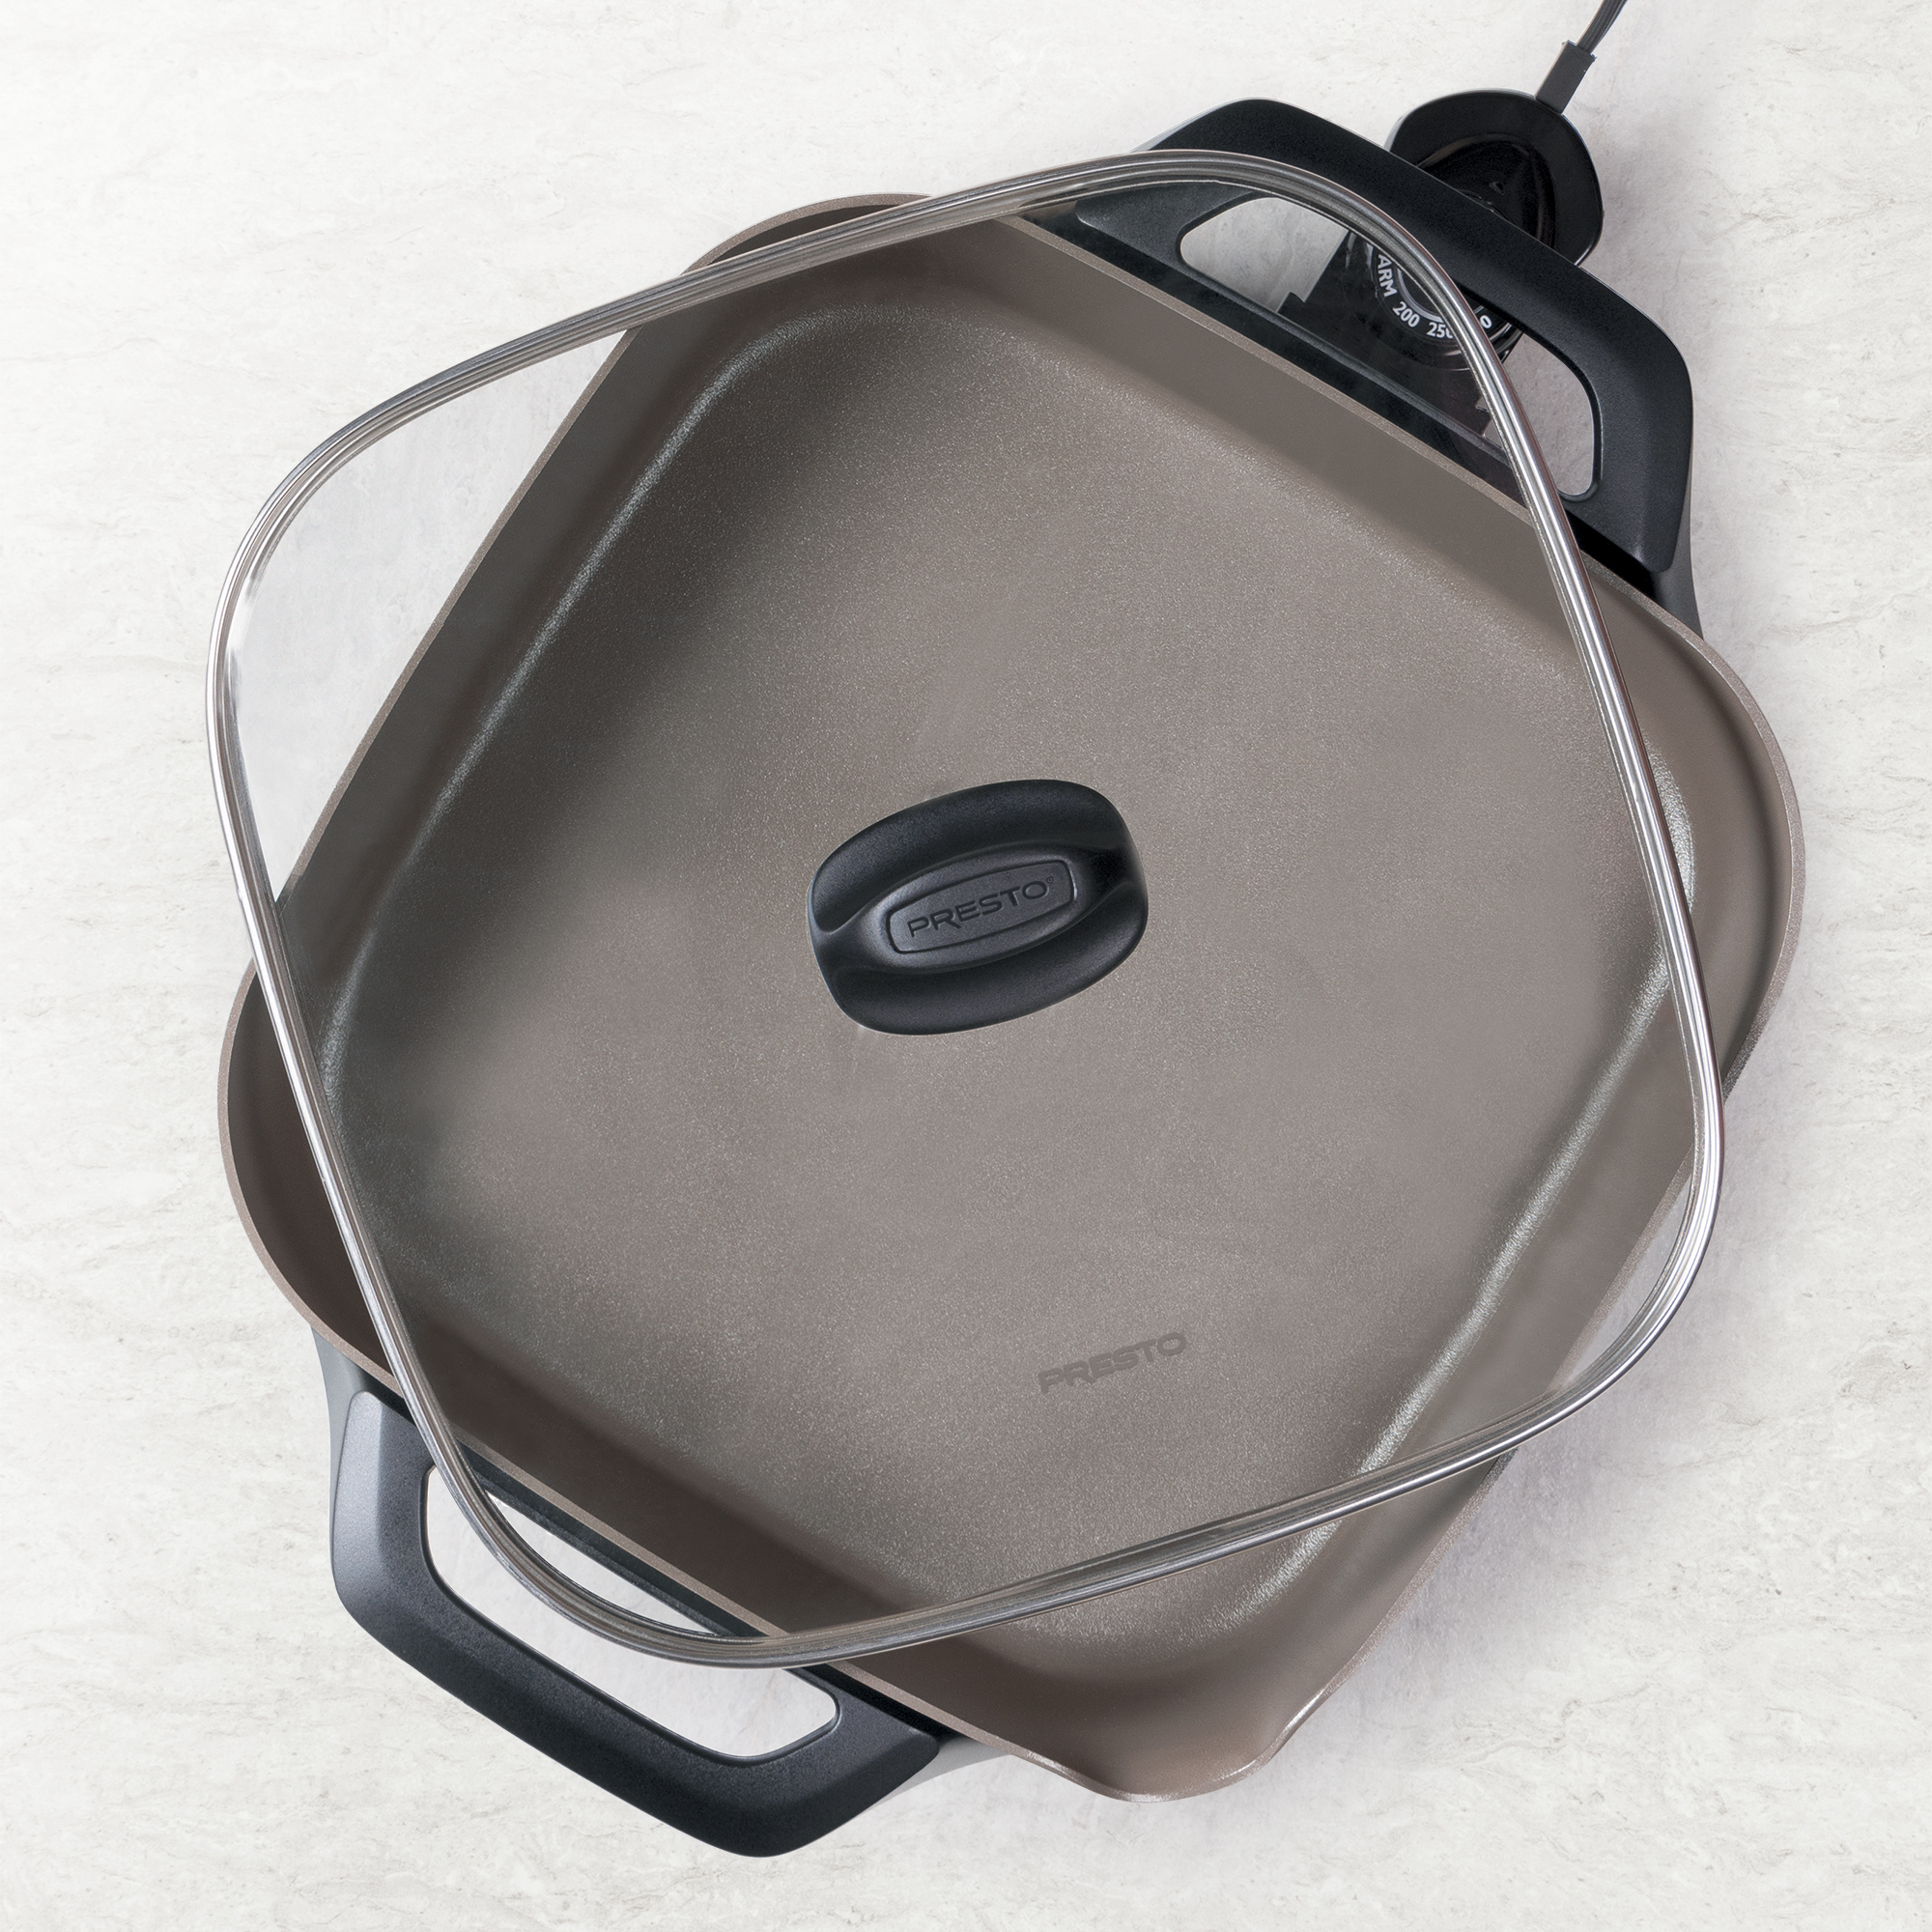 Presto 12-inch Ceramic Electric Skillet with Glass Cover,  07120 - image 4 of 12